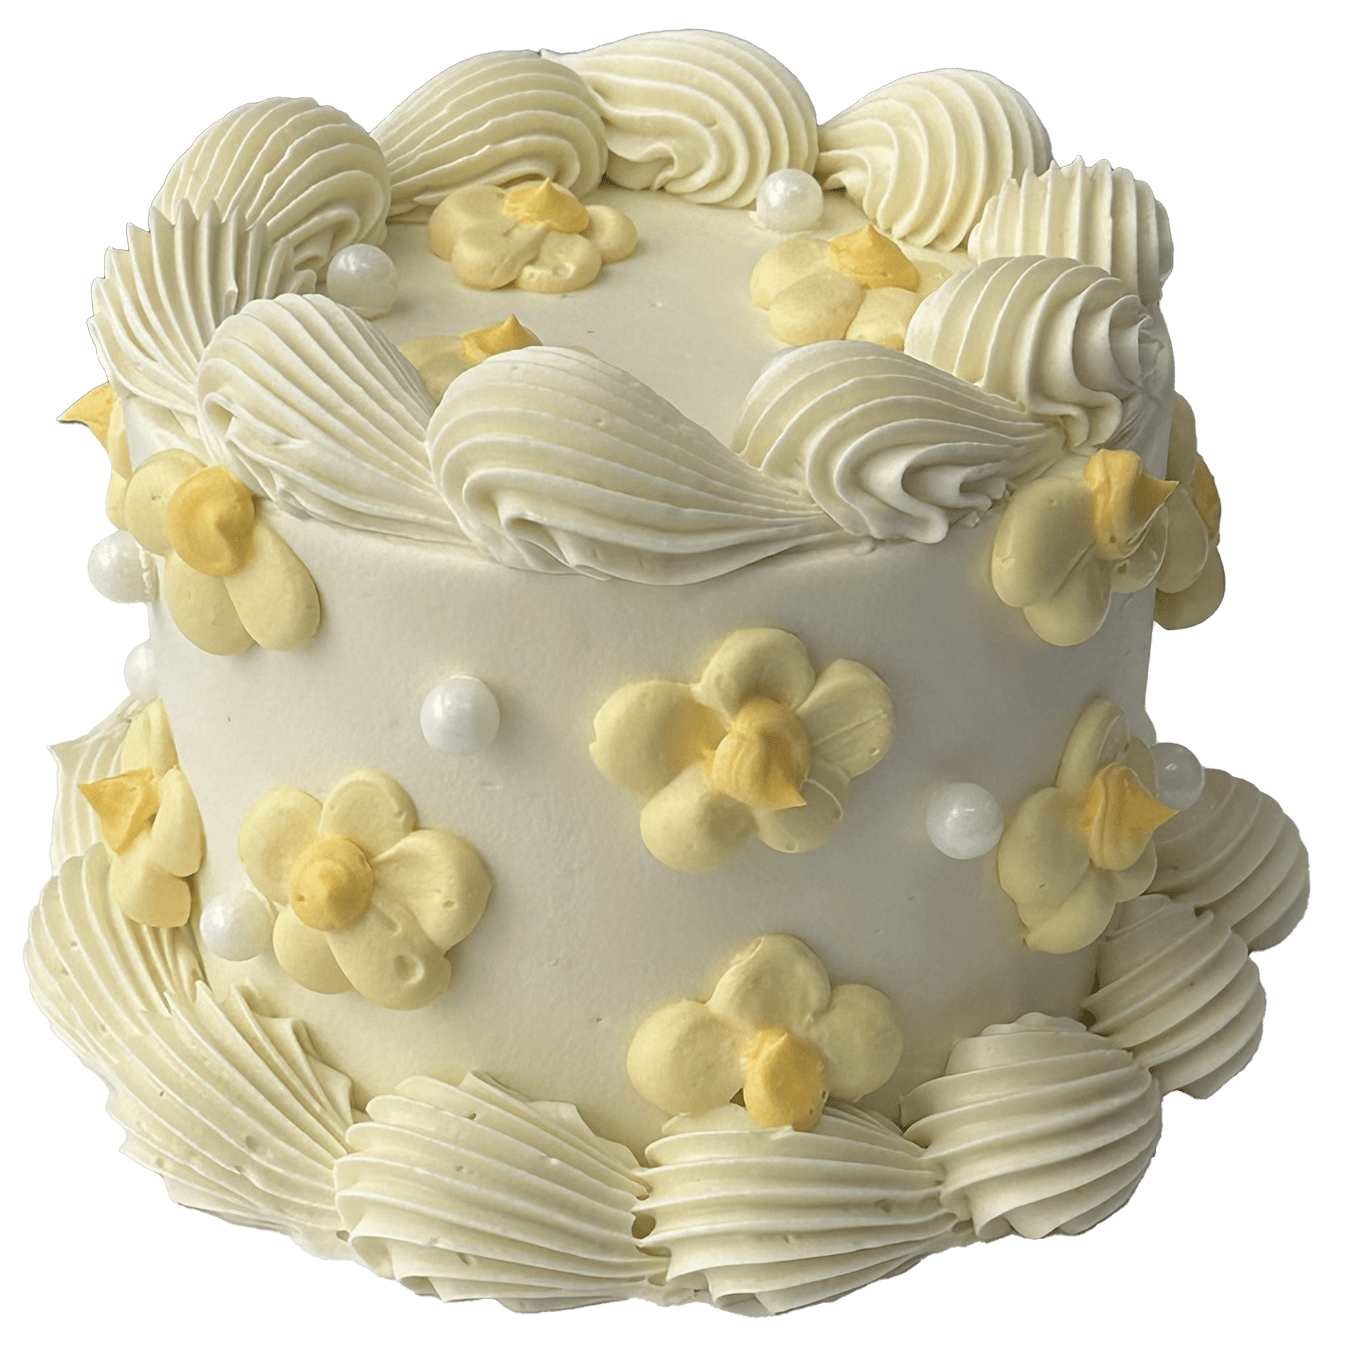  A small mini round shaped Swiss meringue buttercream cake with a white base colour and white piped shells.  Pretty yellow daisies have been piped on the top and sides of the cake and some sugar pearls added to complete the decoration.